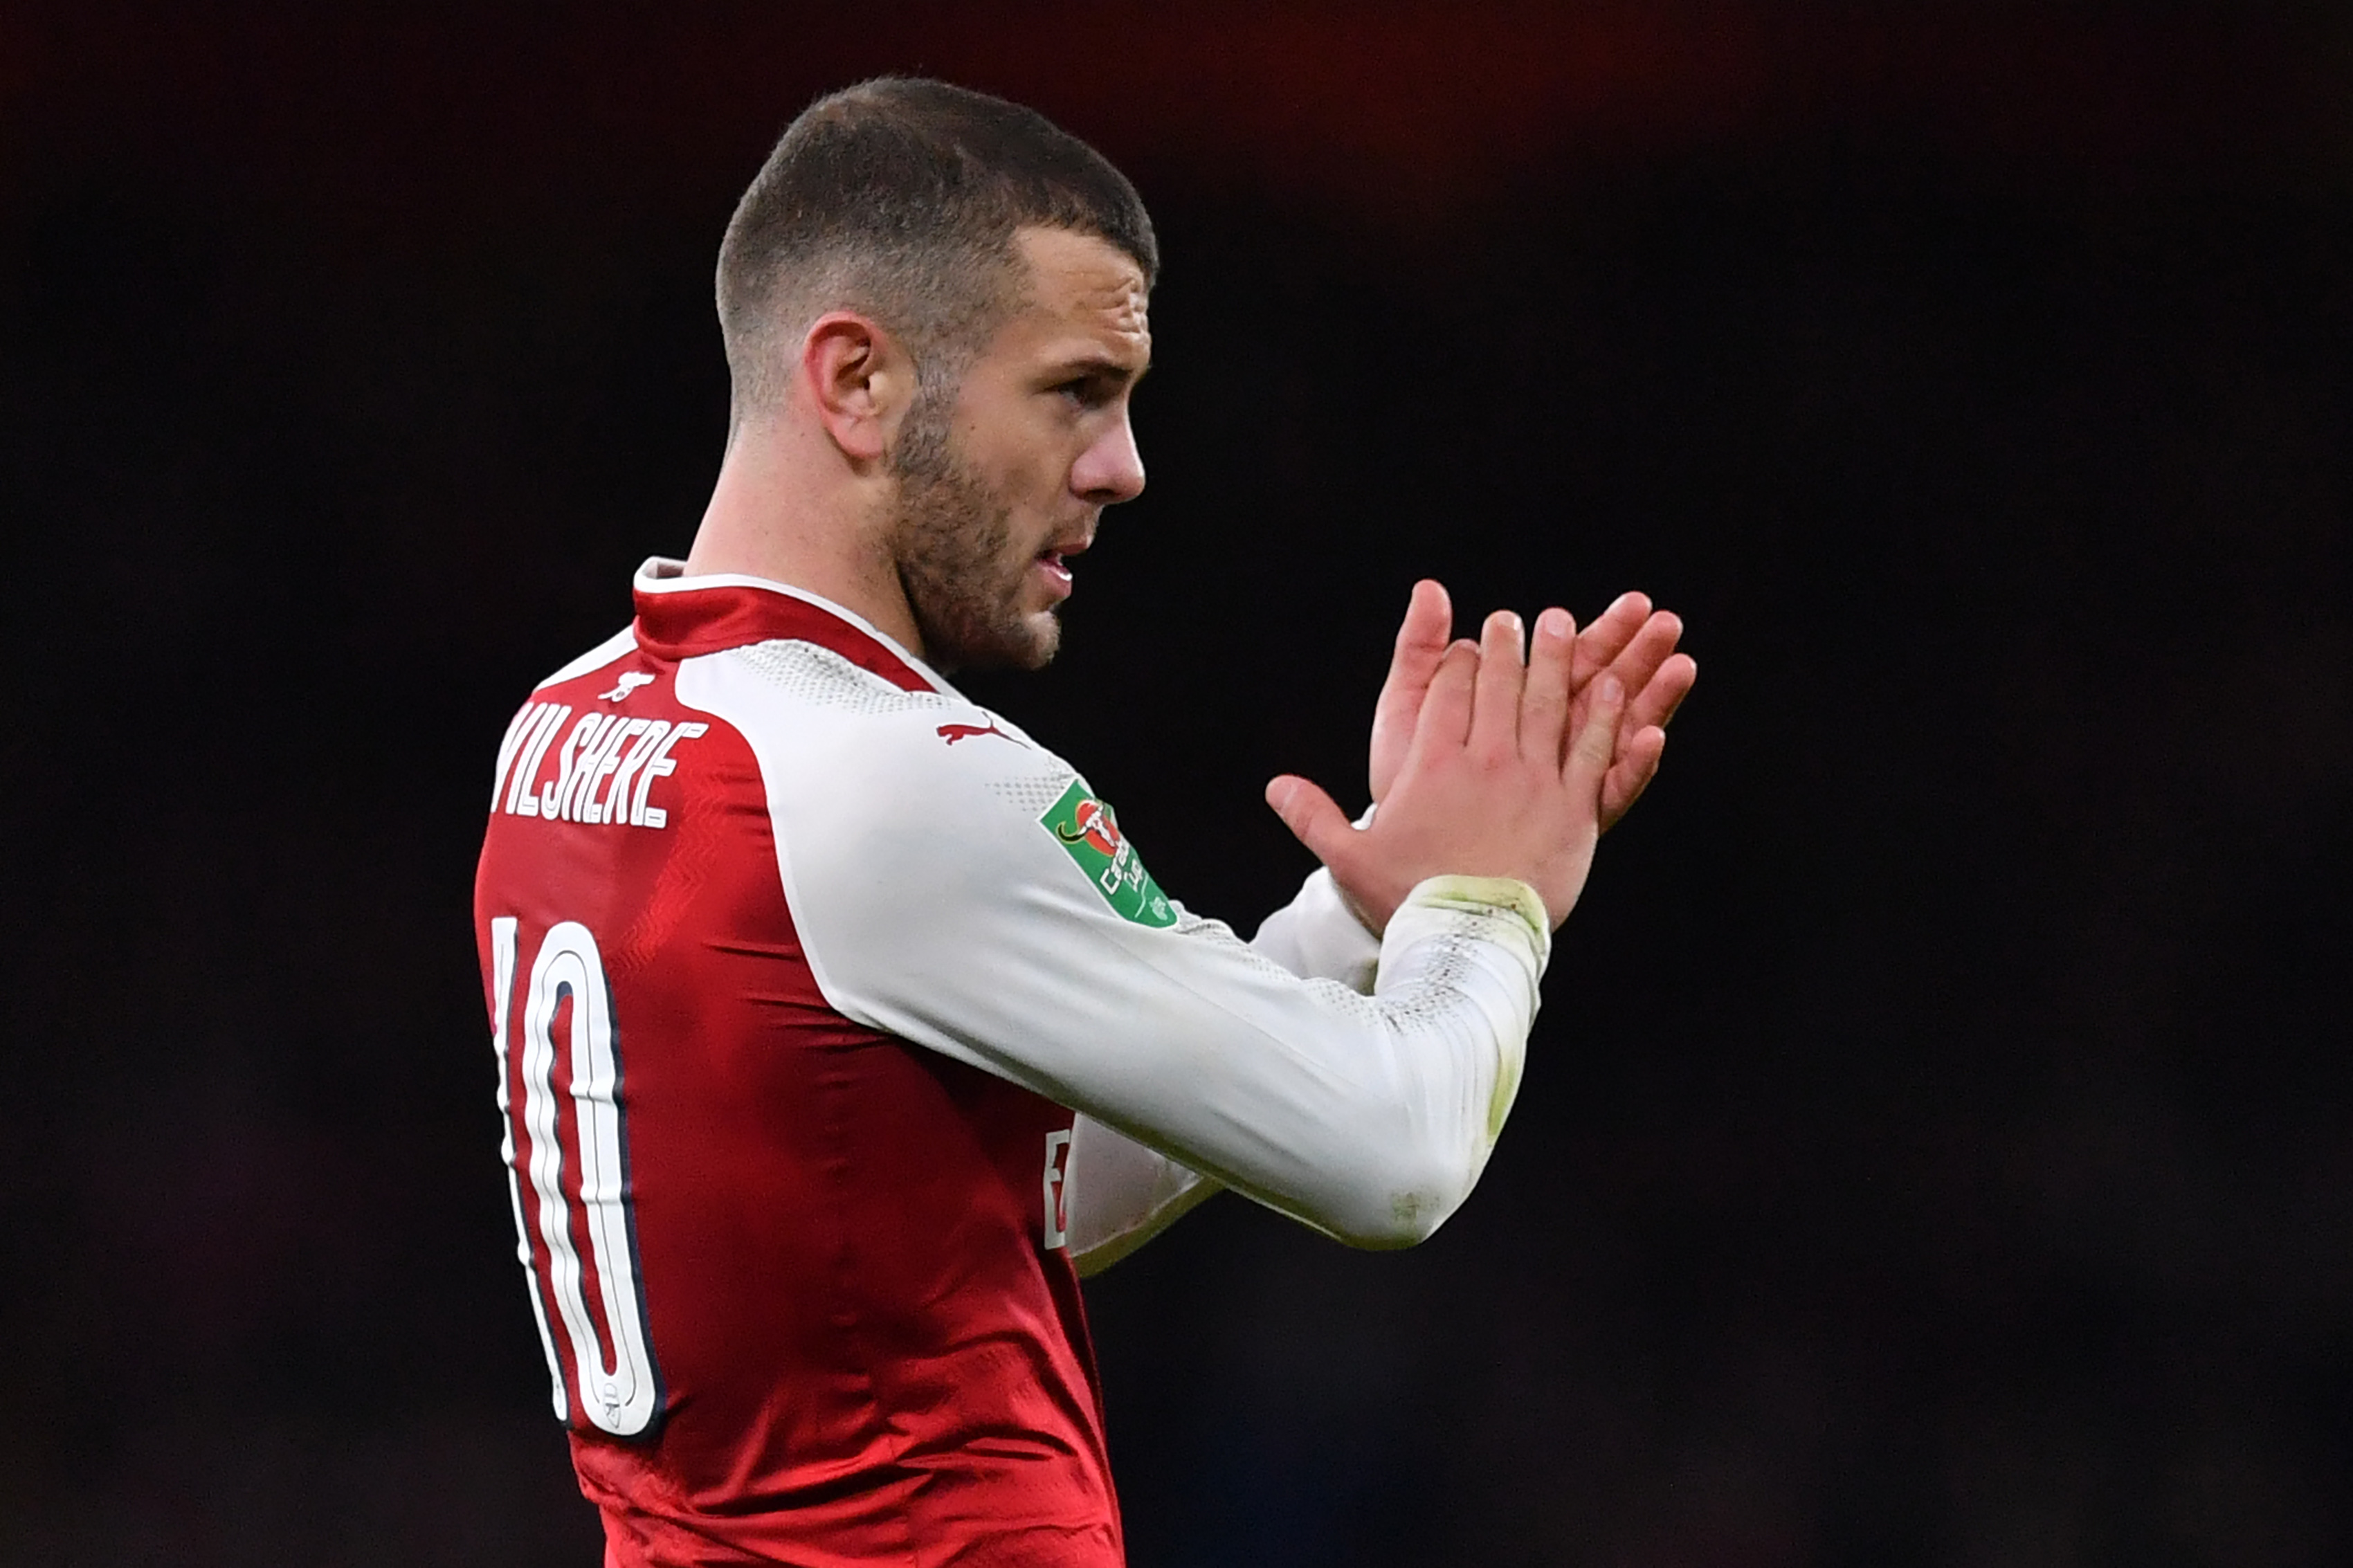 Arsenal's English midfielder Jack Wilshere gestures at the final whistle during the League Cup semi-final football match between Arsenal and Chelsea at the Emirates Stadium in London on January 24, 2018.  / AFP PHOTO / Ben STANSALL / RESTRICTED TO EDITORIAL USE. No use with unauthorized audio, video, data, fixture lists, club/league logos or 'live' services. Online in-match use limited to 75 images, no video emulation. No use in betting, games or single club/league/player publications.  /         (Photo credit should read BEN STANSALL/AFP/Getty Images)